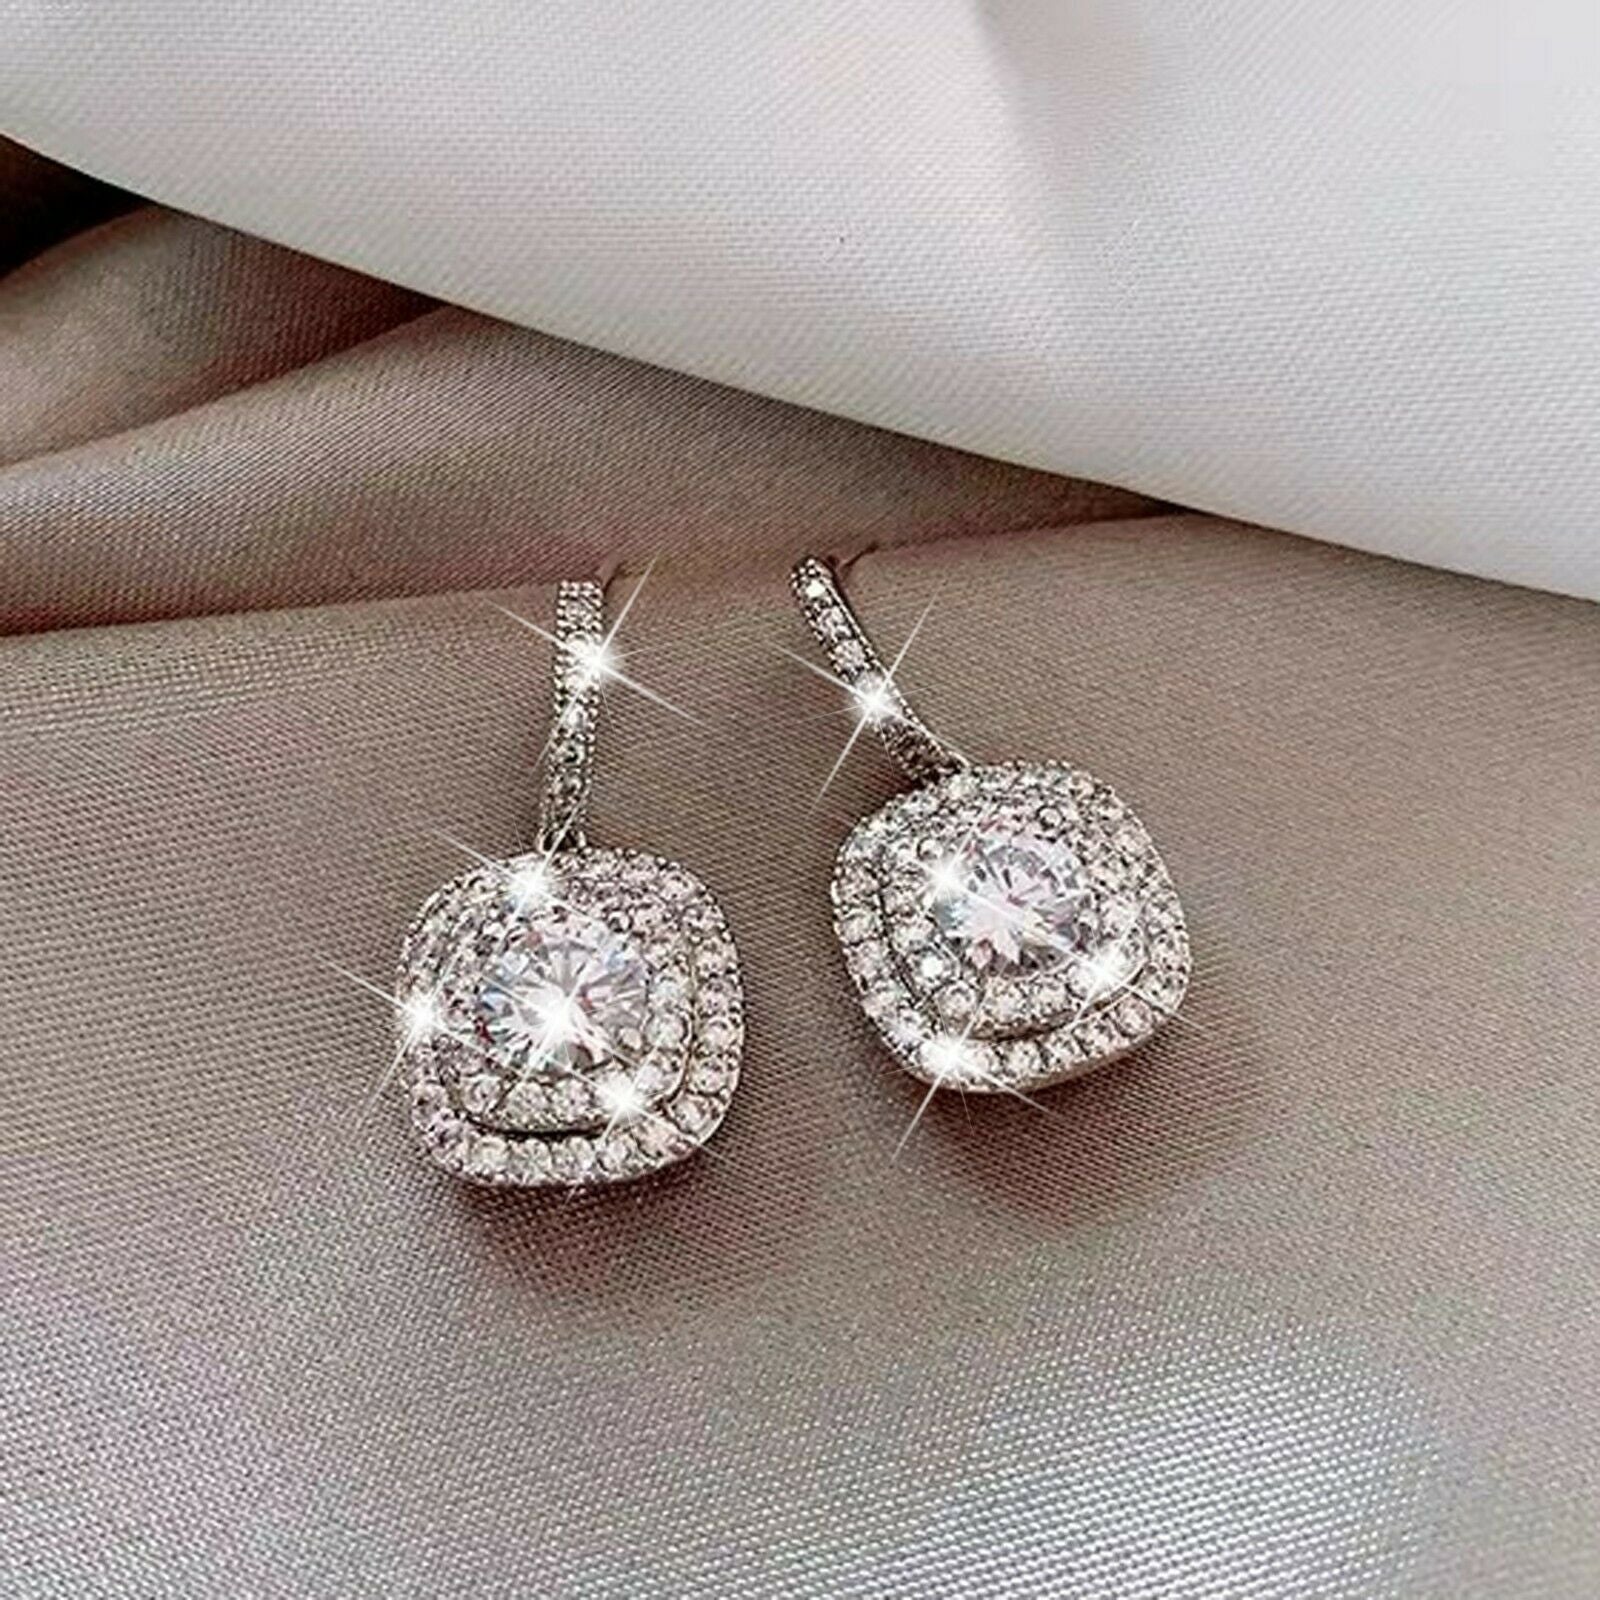 18k white Gold filled stud made with Swarovski crystal luxury dangle drop earrings